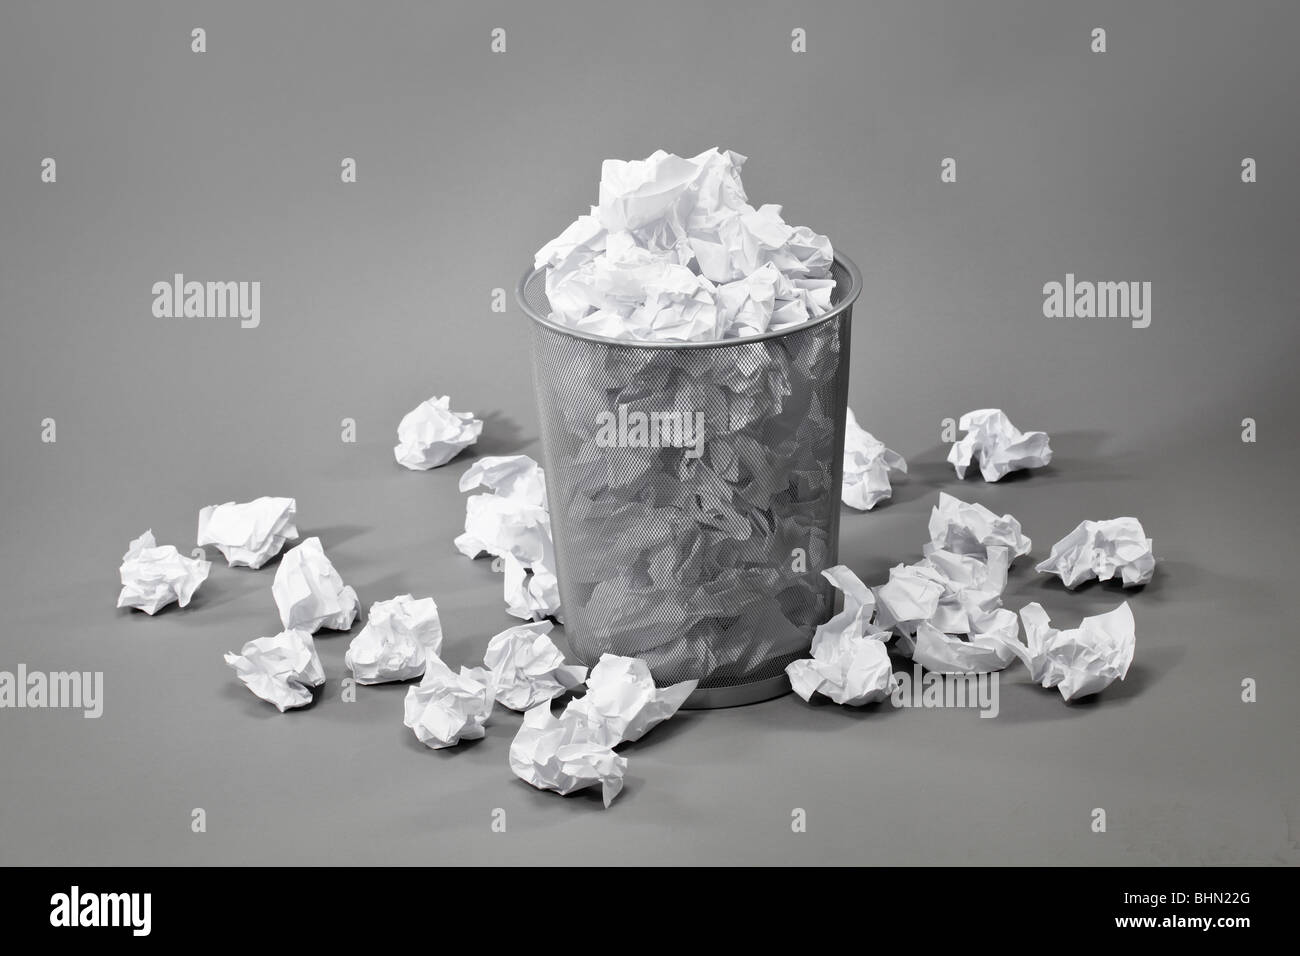 A trashcan filled with crumpled white papers Stock Photo